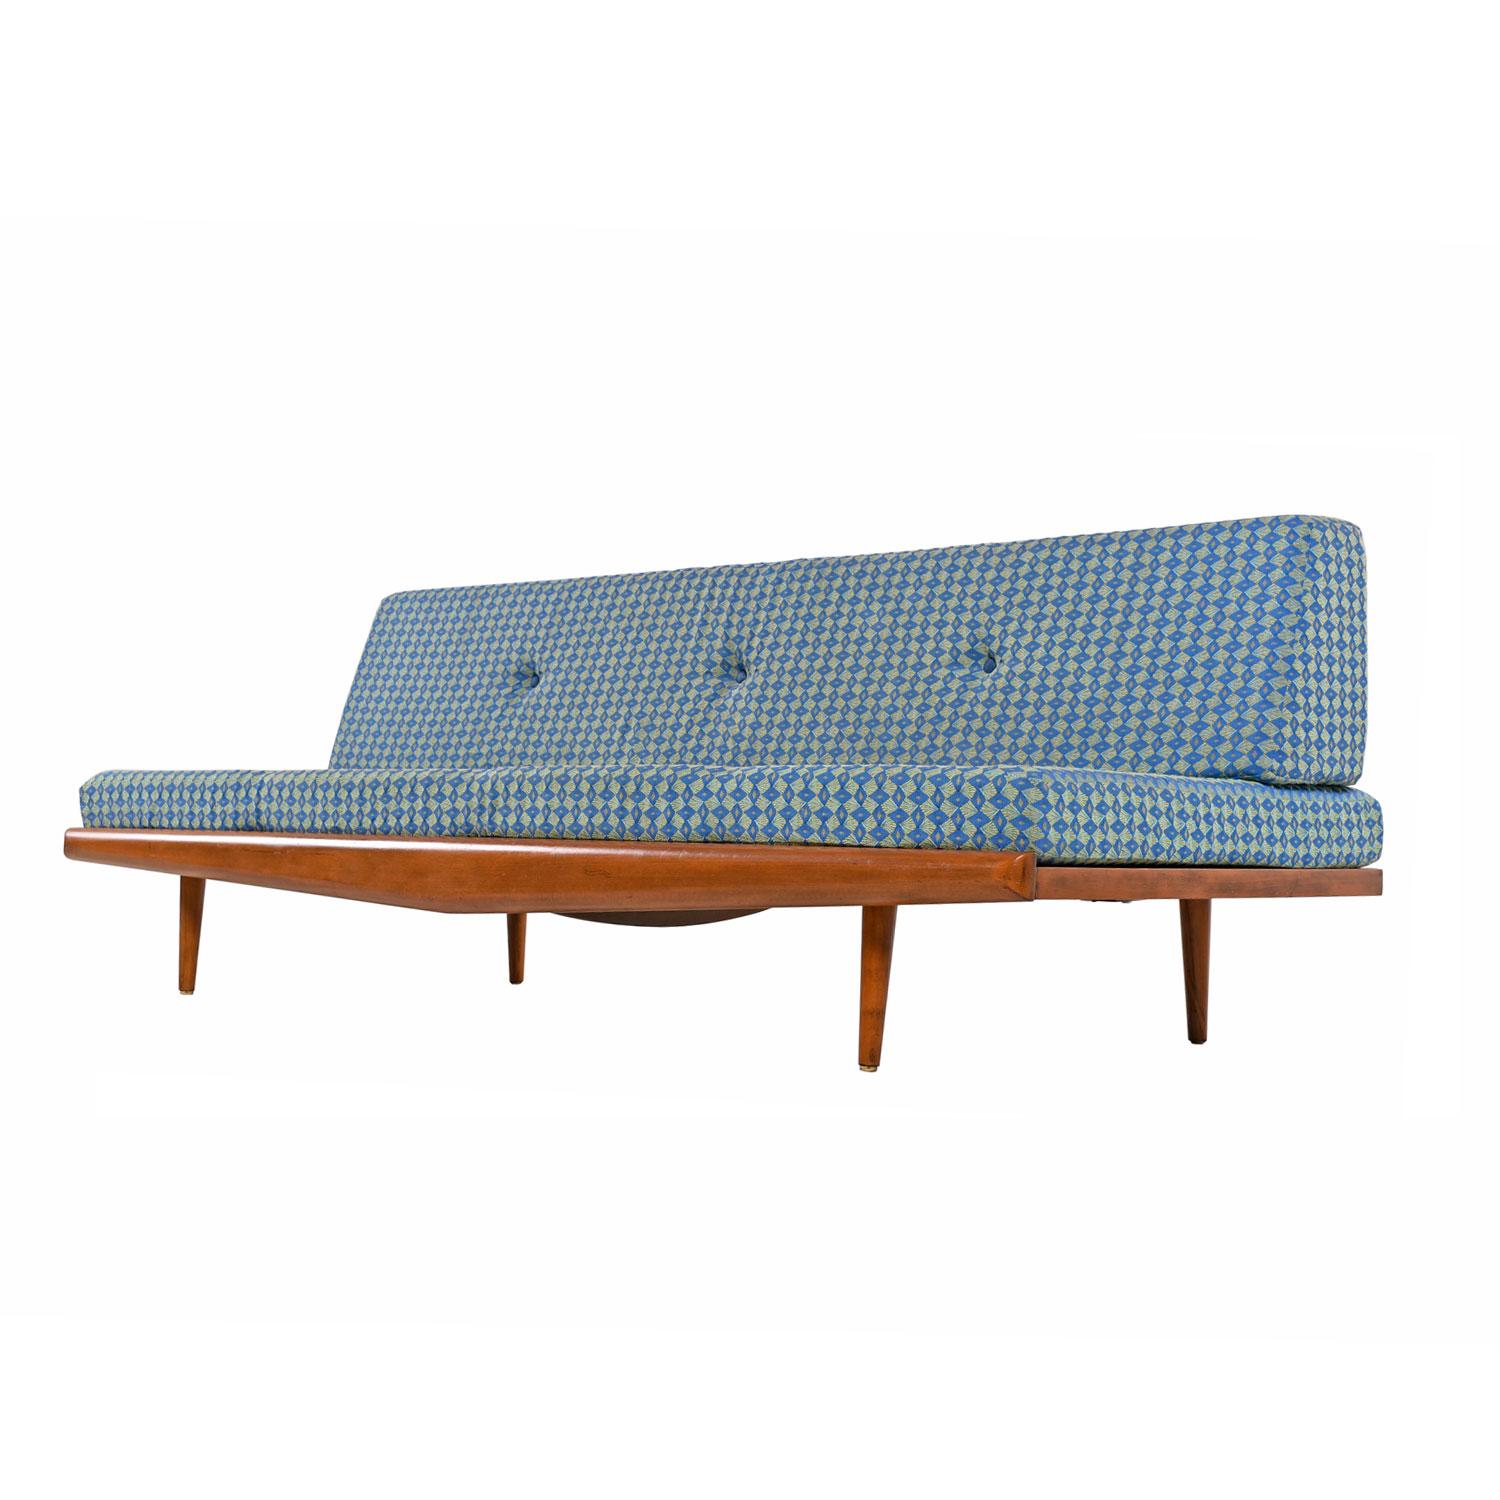 adrian pearsall daybed